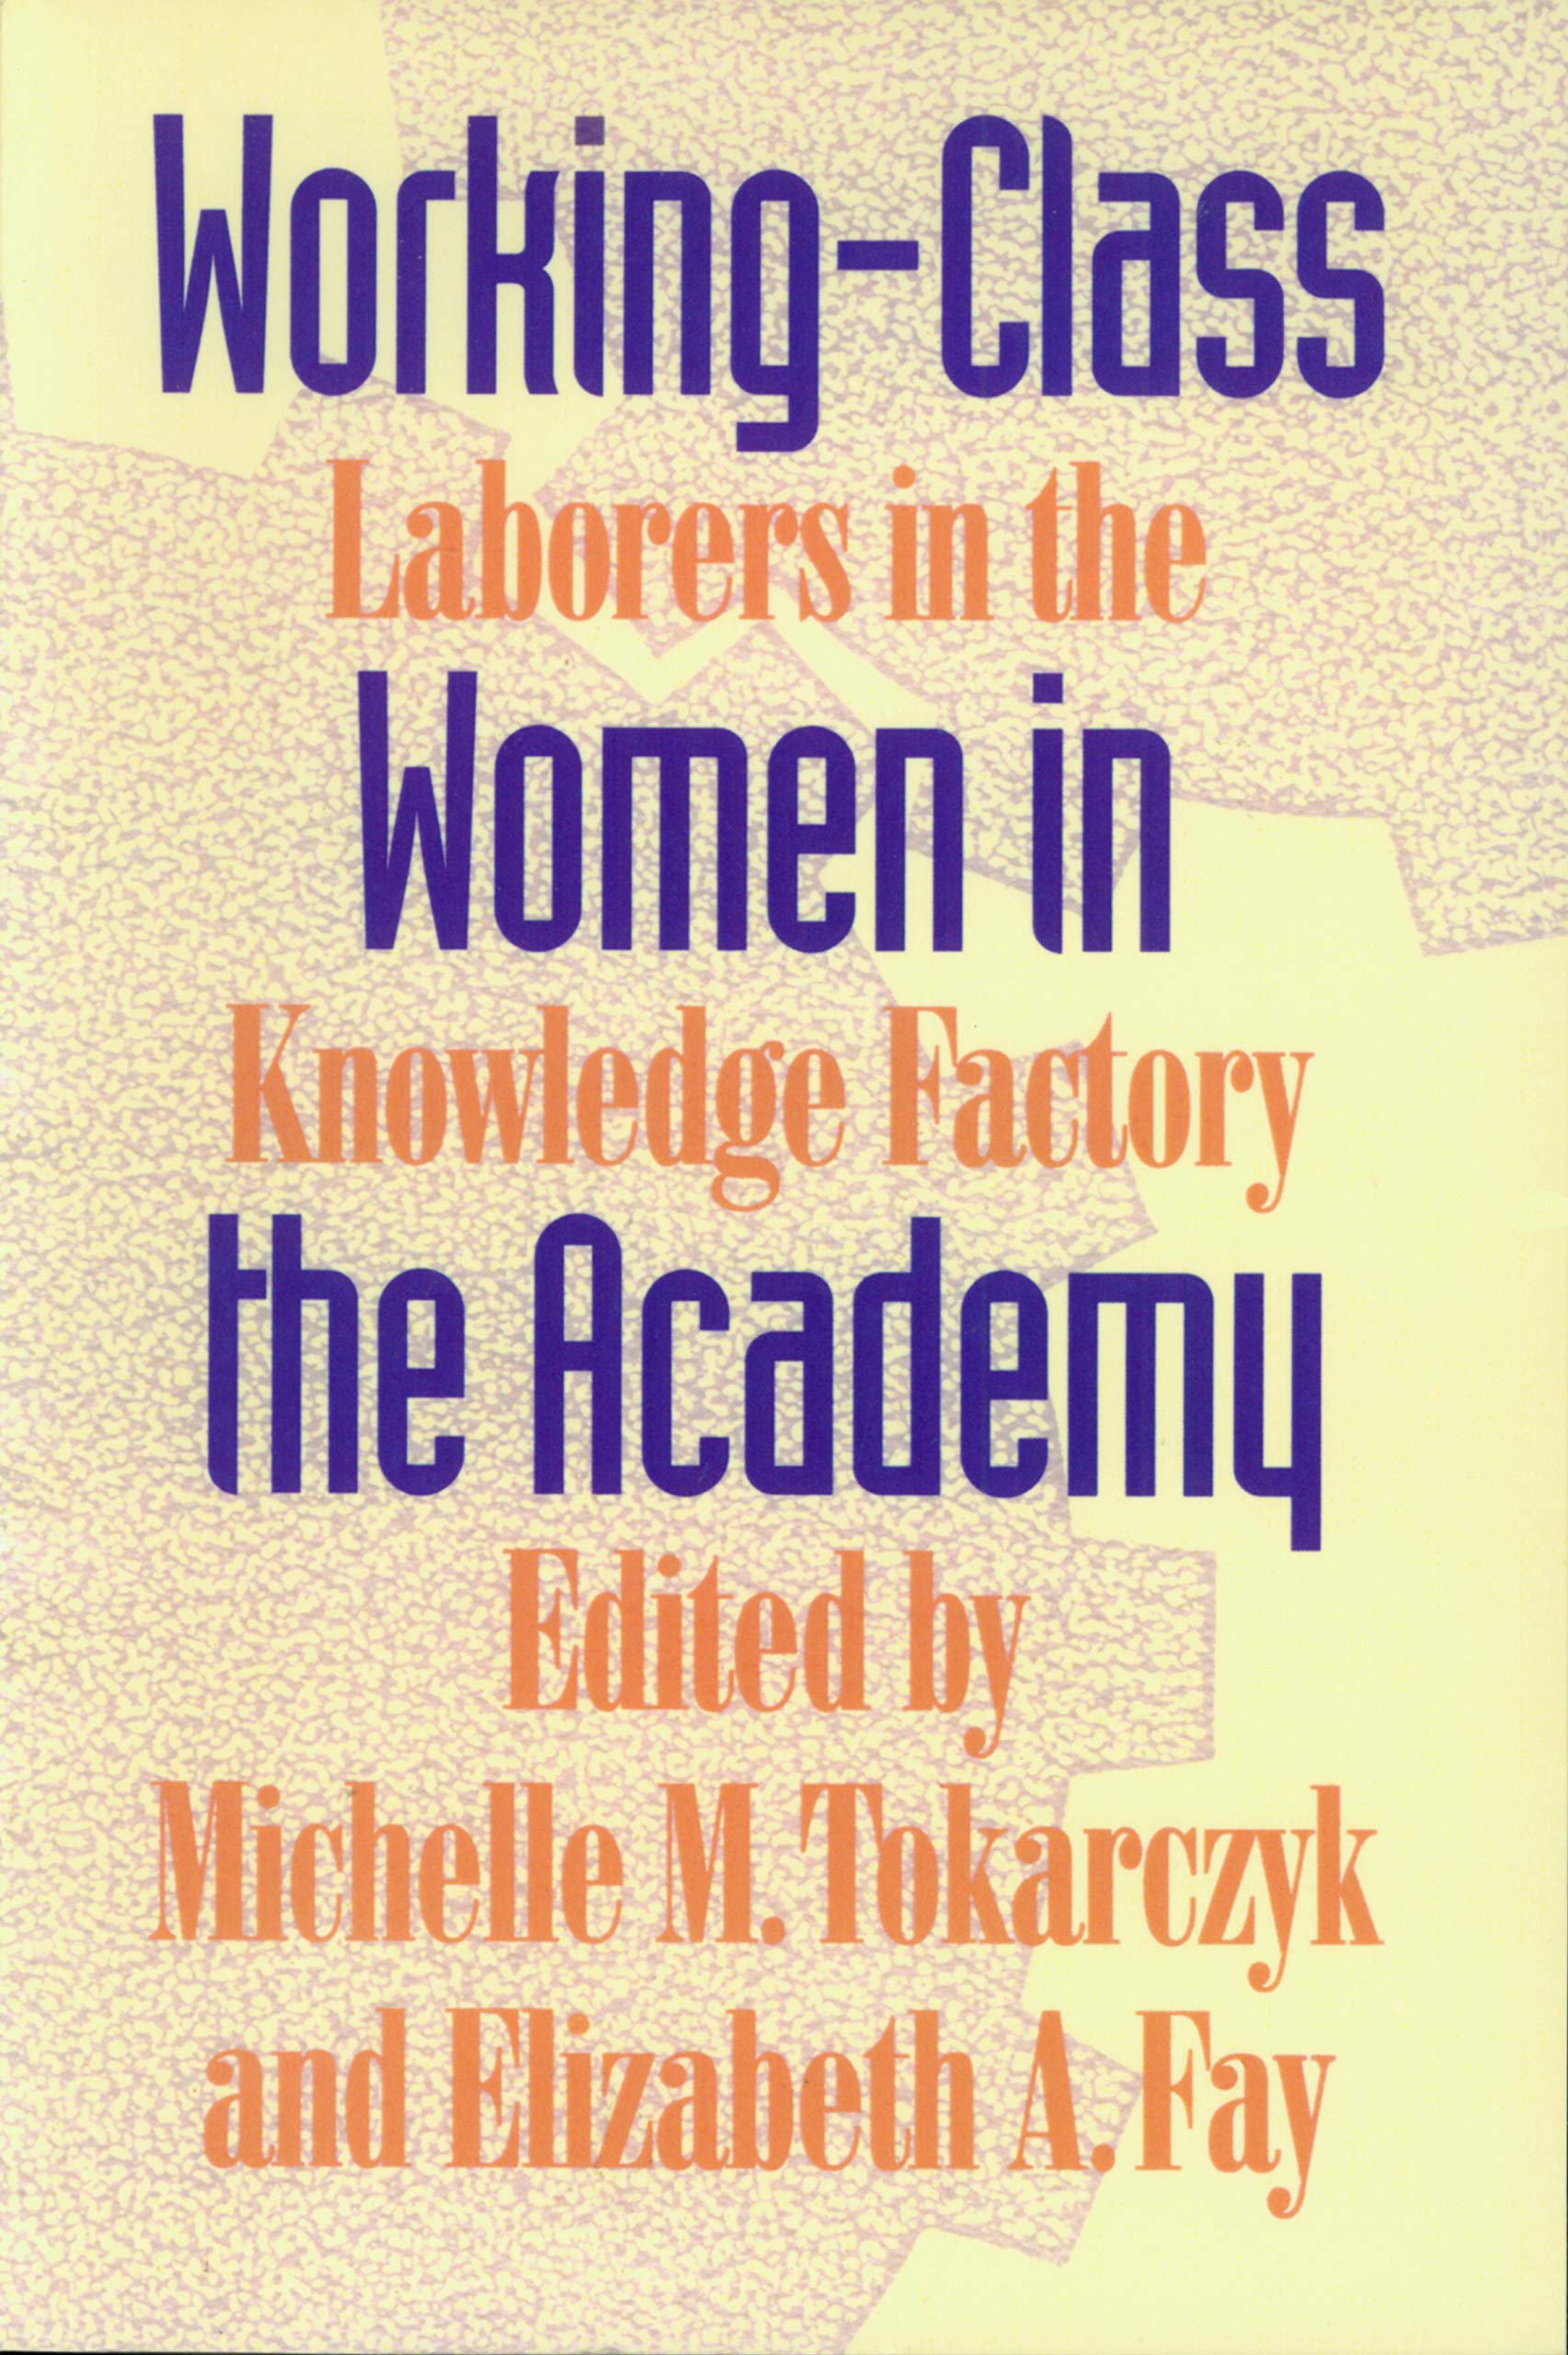 Working-Class Women in the Academy: Laborers in the Knowledge Factory